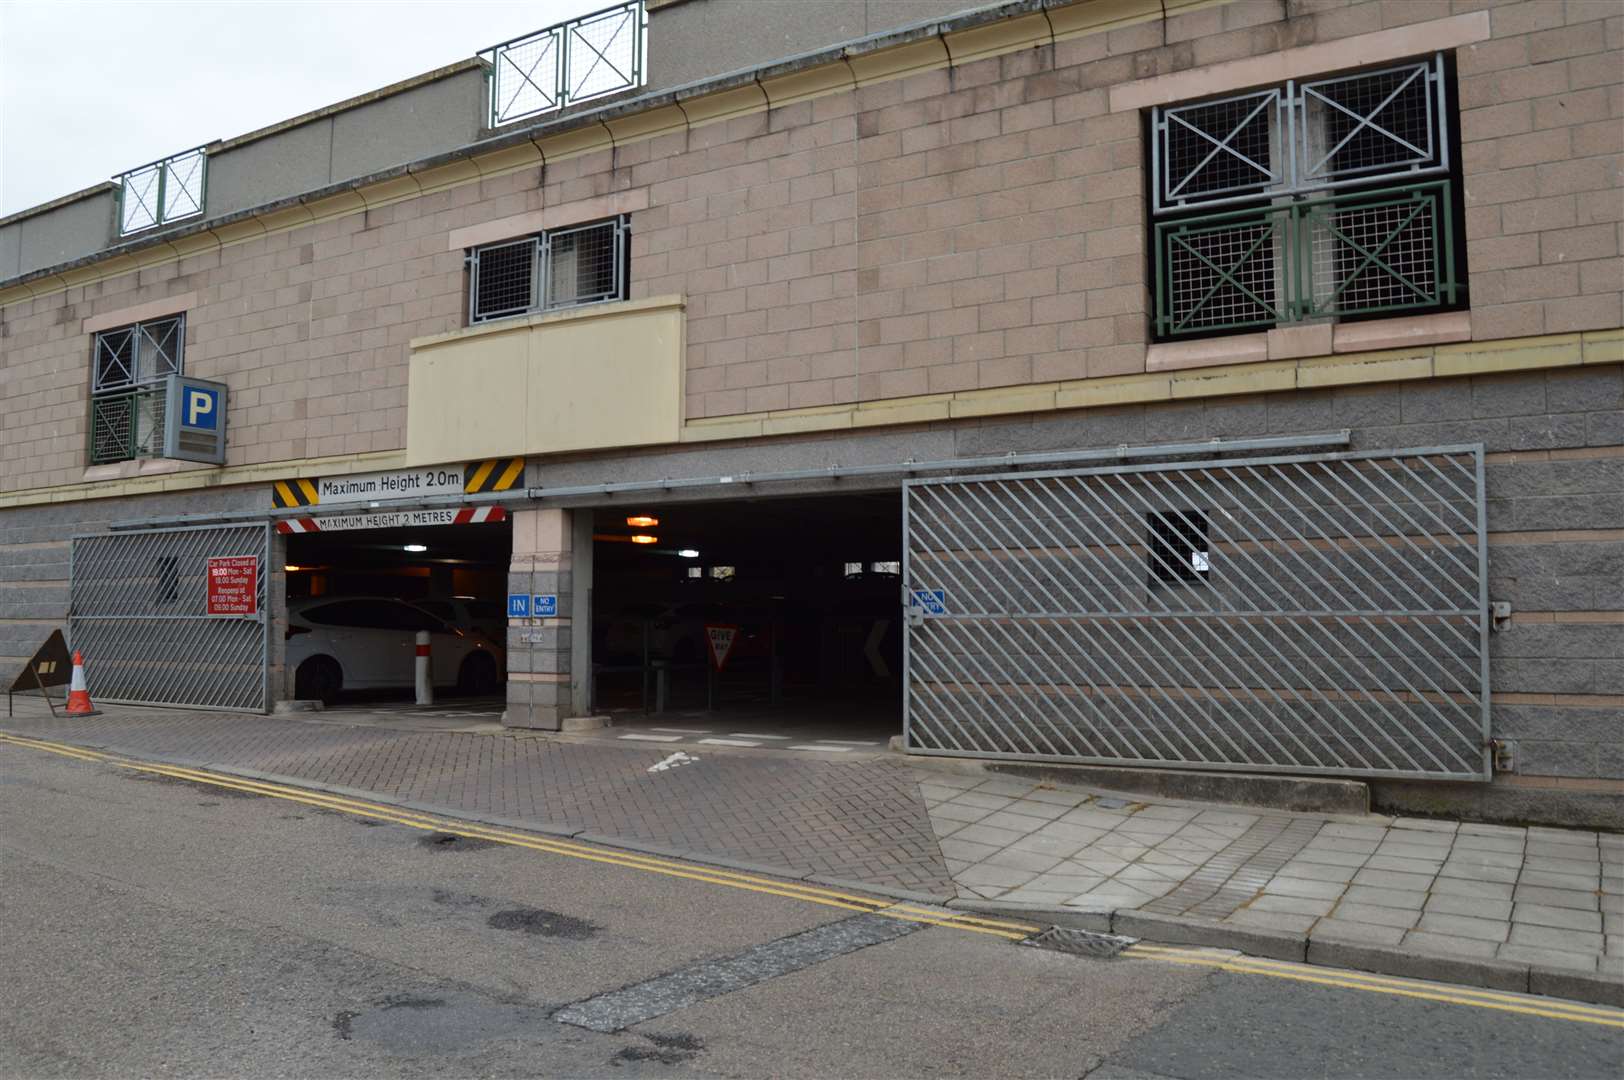 The upper levels of St Giles Centre Car Park will remain closed until further notice.